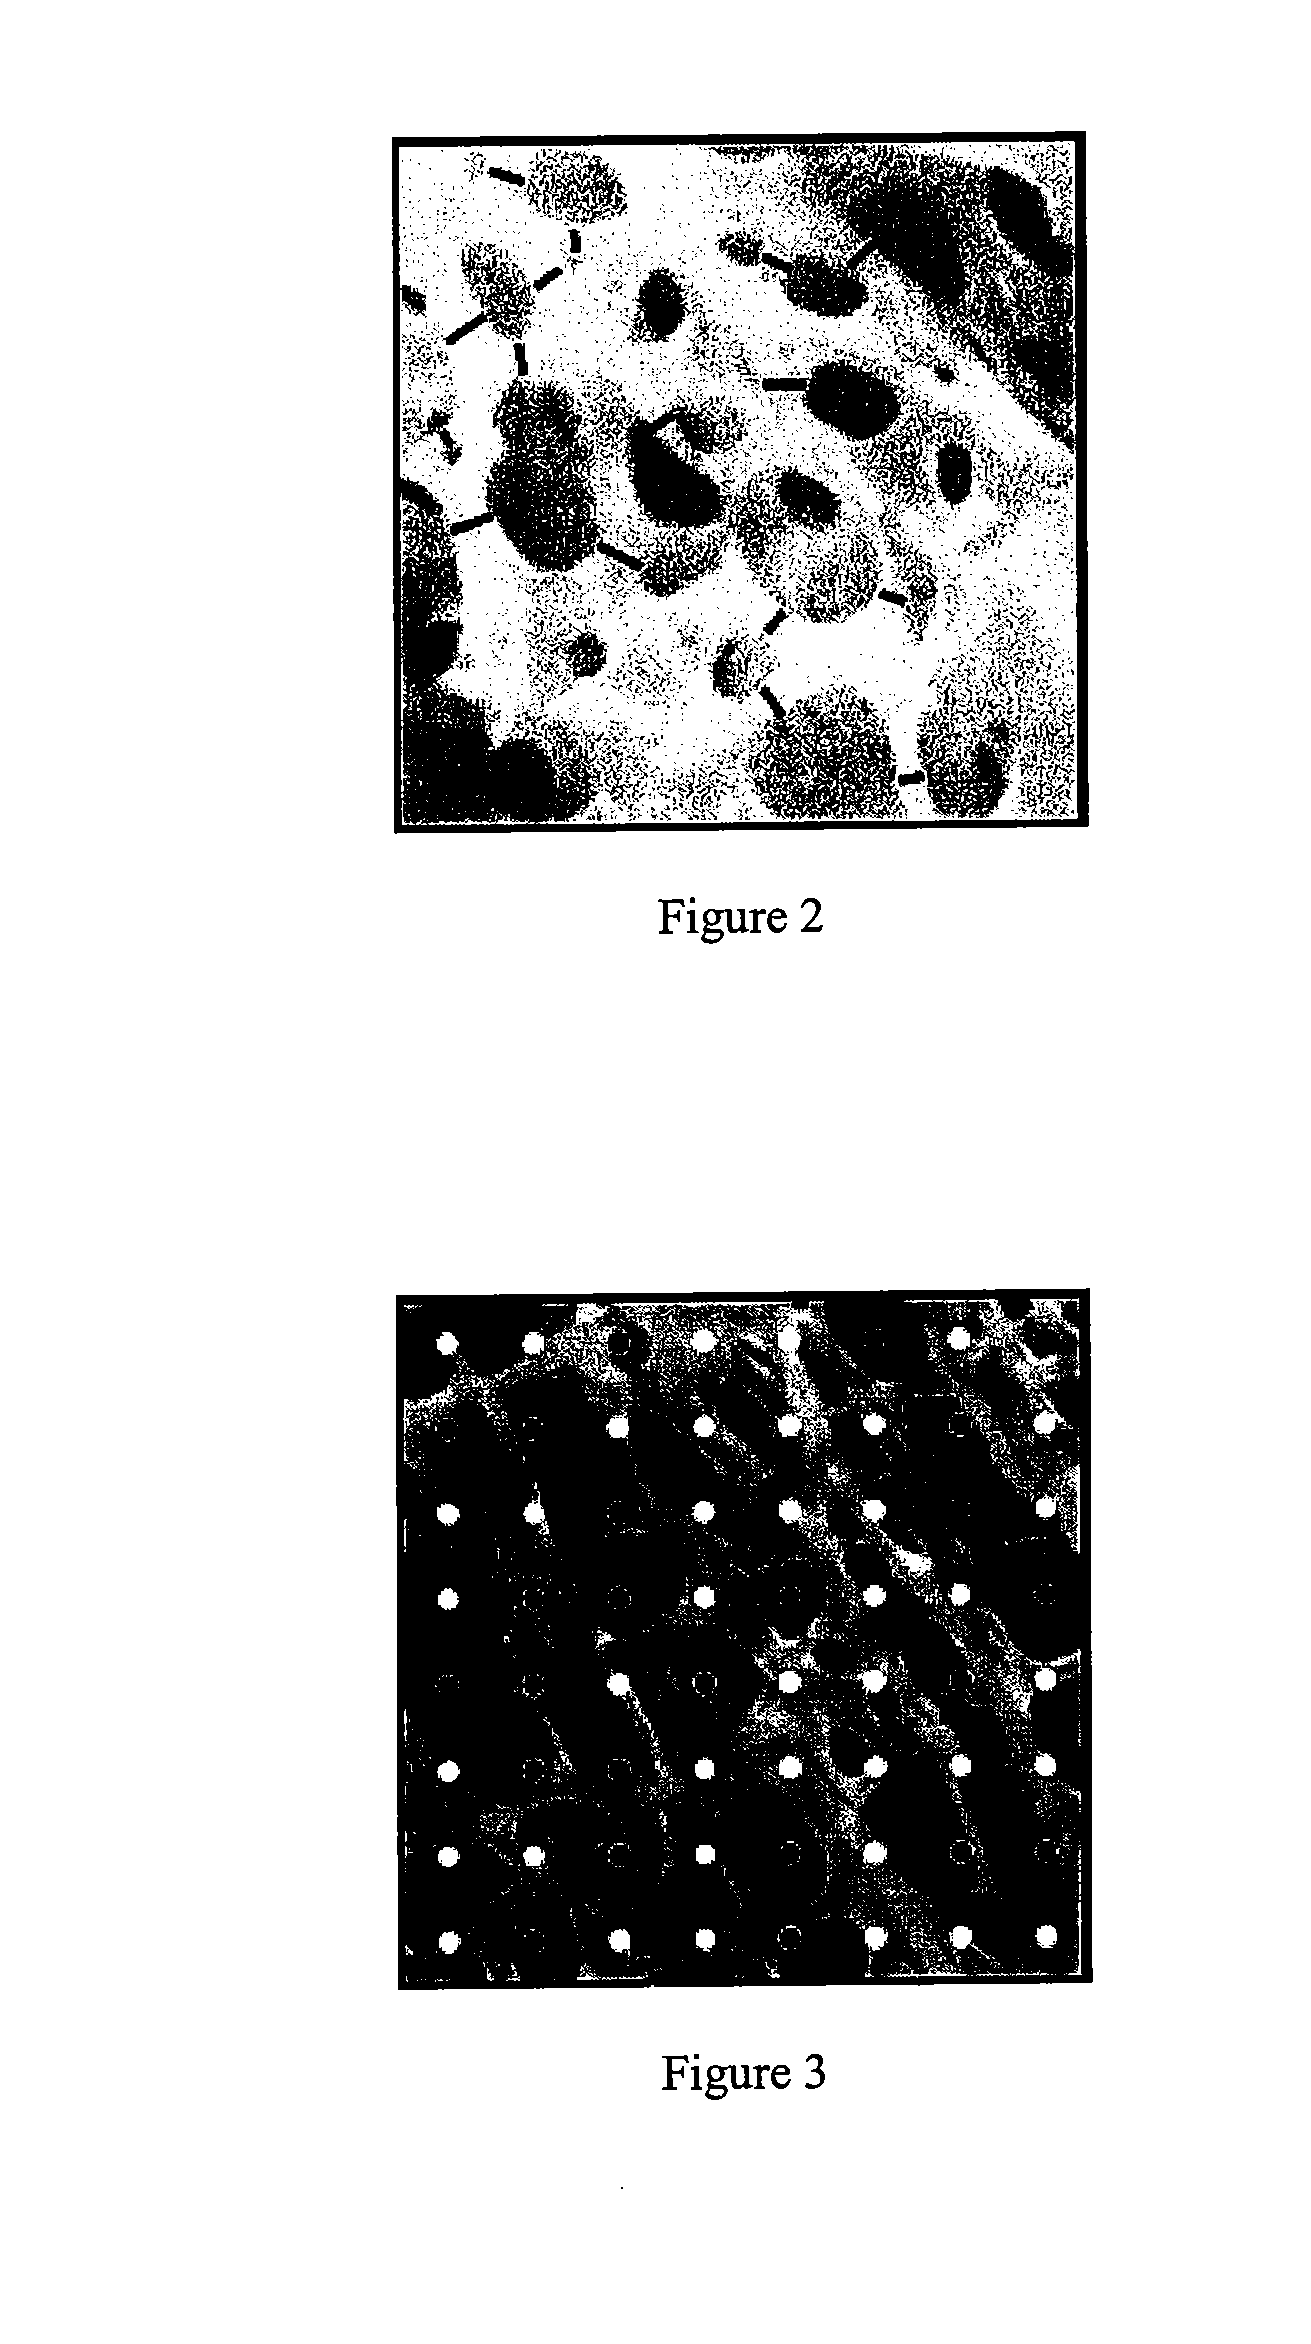 Templates for assessing bone quality and methods of use thereof